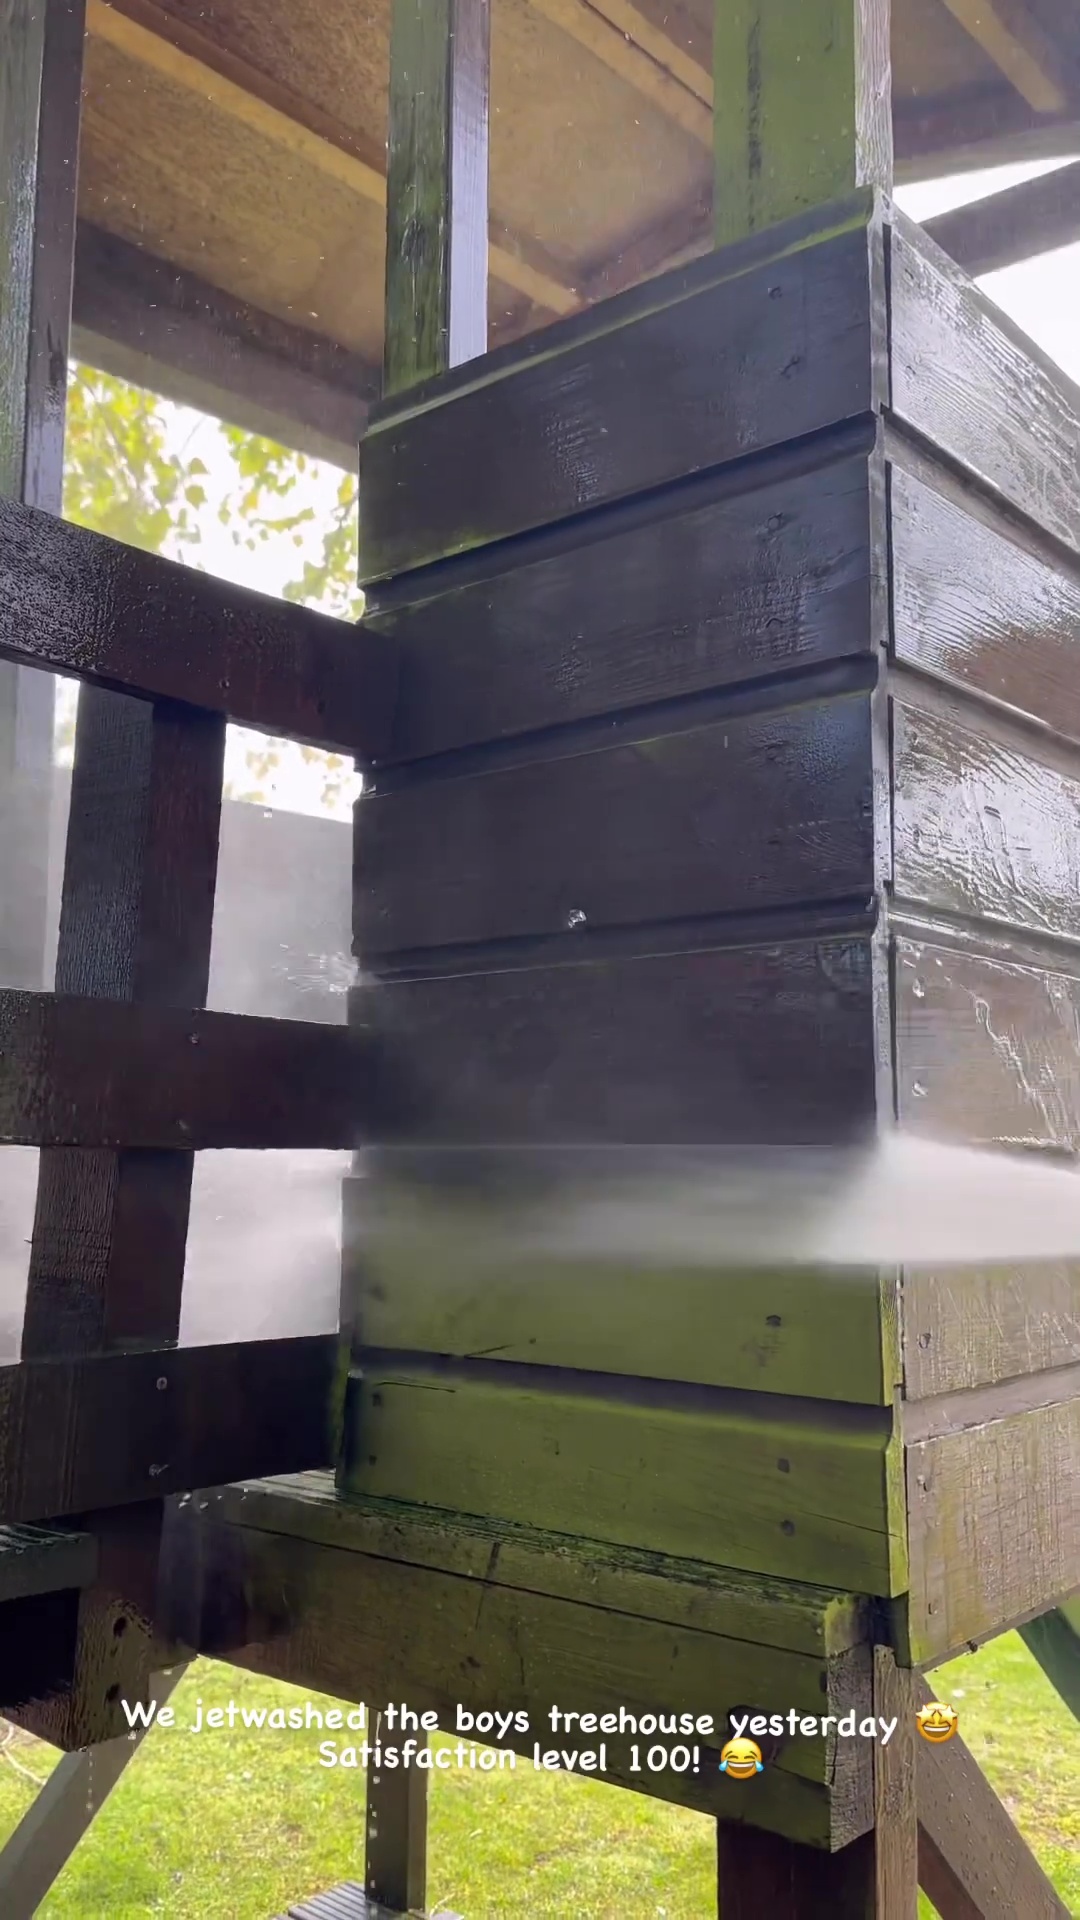 The once green-covered treehouse was instantly transformed with Sophie's jet wash